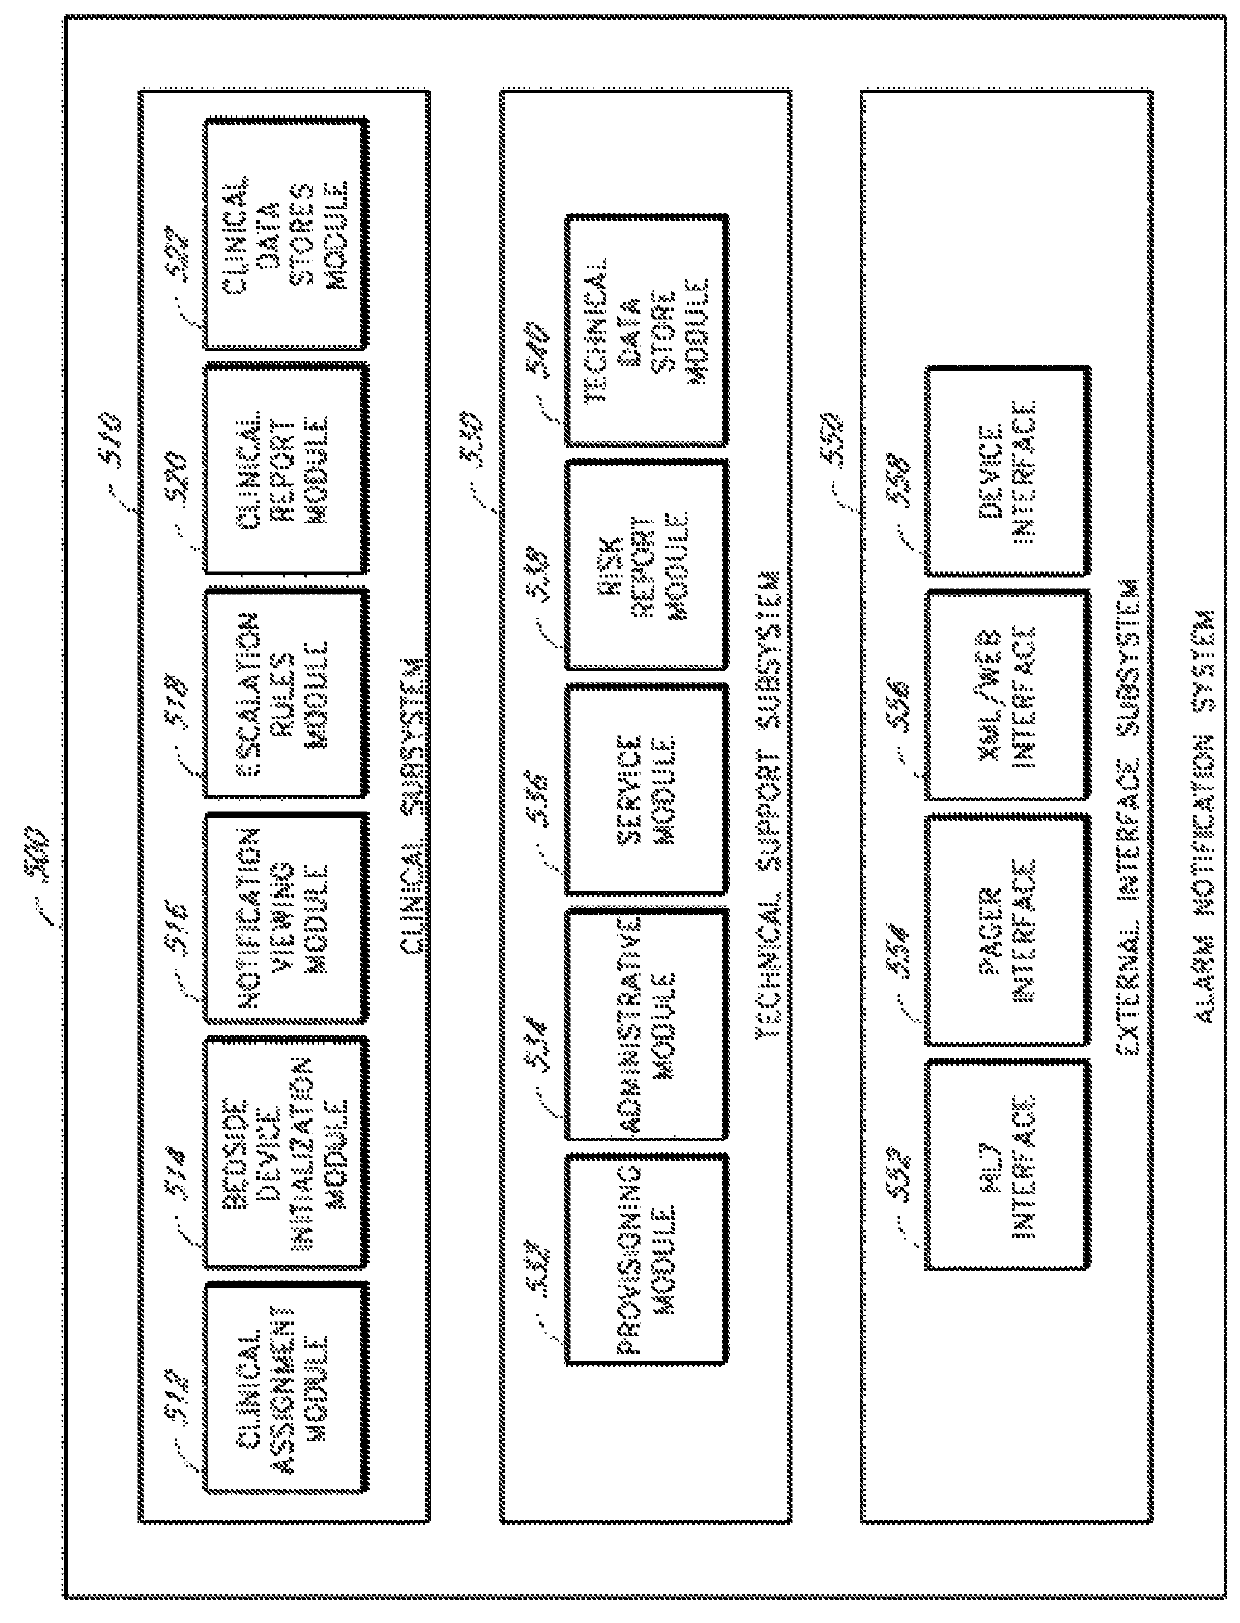 Systems and methods for monitoring a patient health network